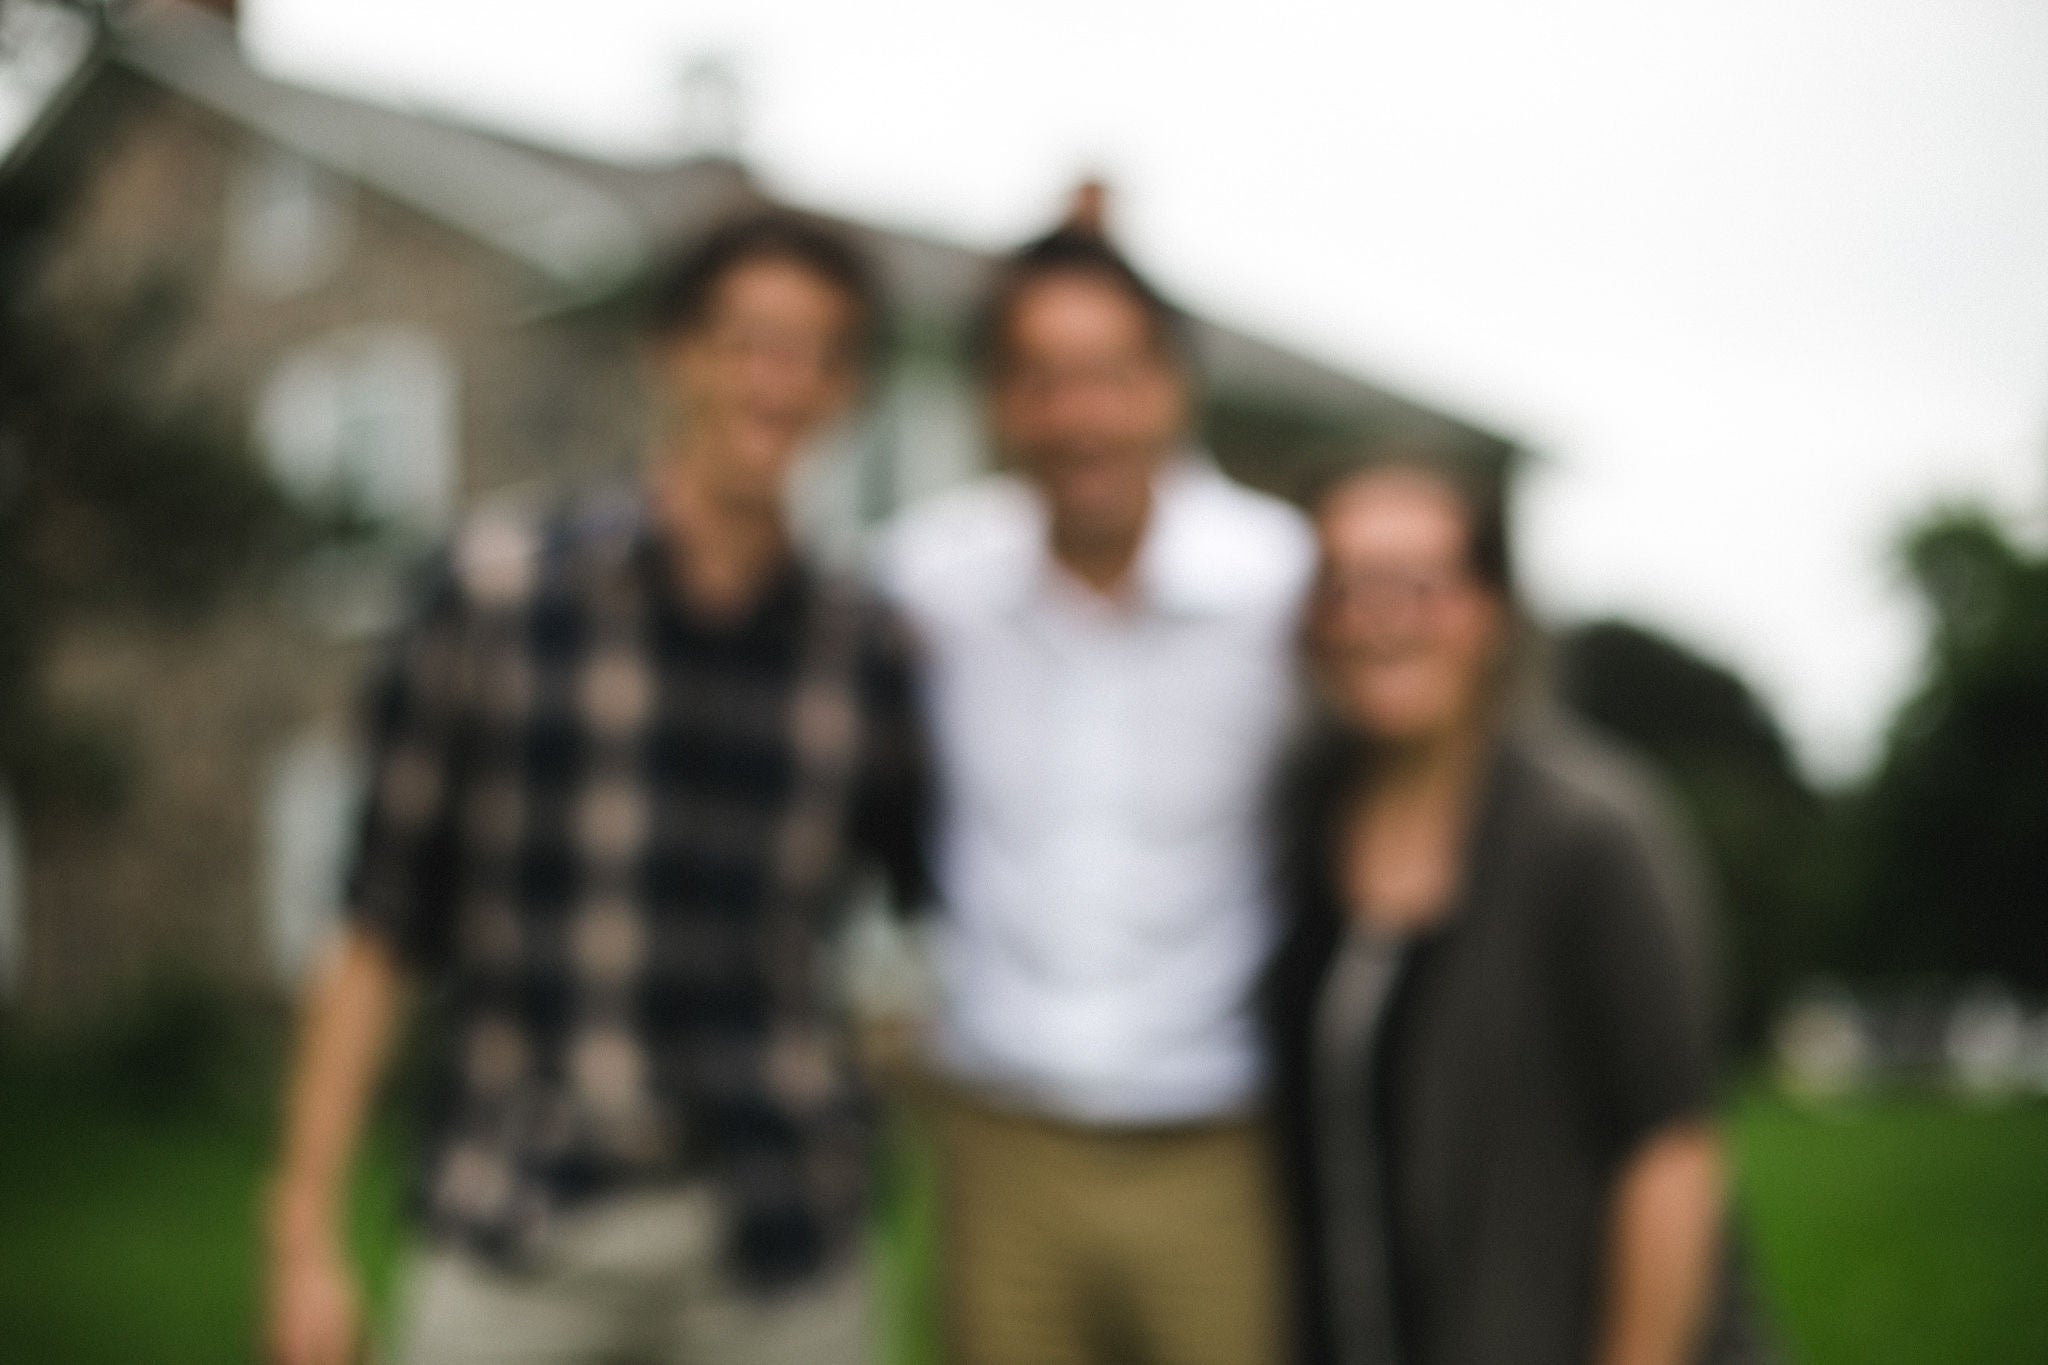 A blurry photo, with justin trudeau in the middle, Jacquie and Karl on either side of him, burbacher house (blurrily) in the background.